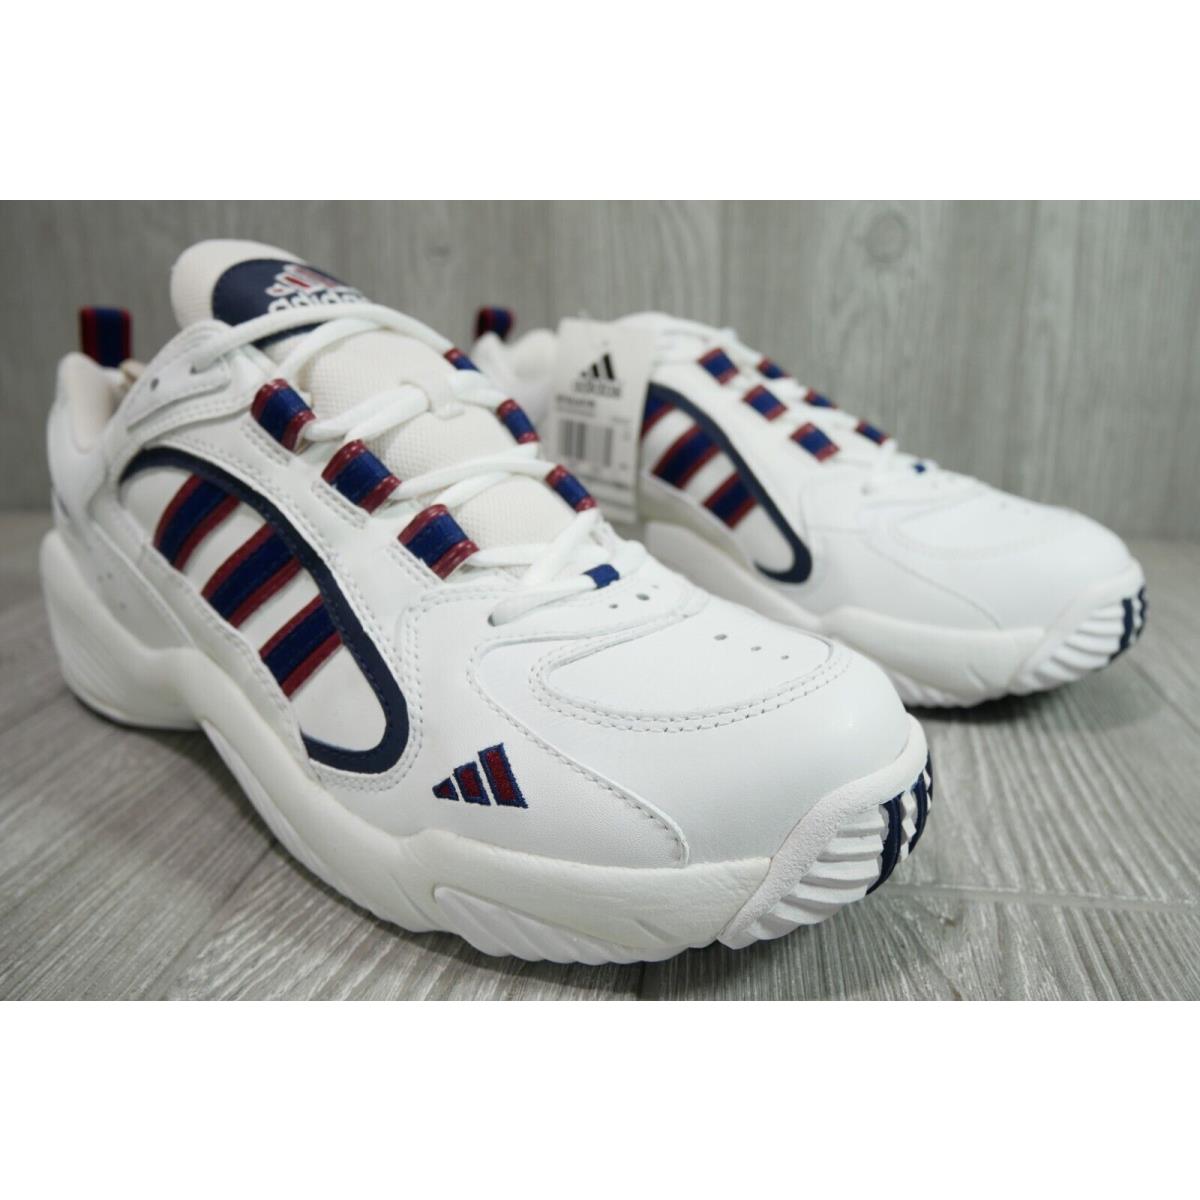 Adidas shoes Trainer - White 1